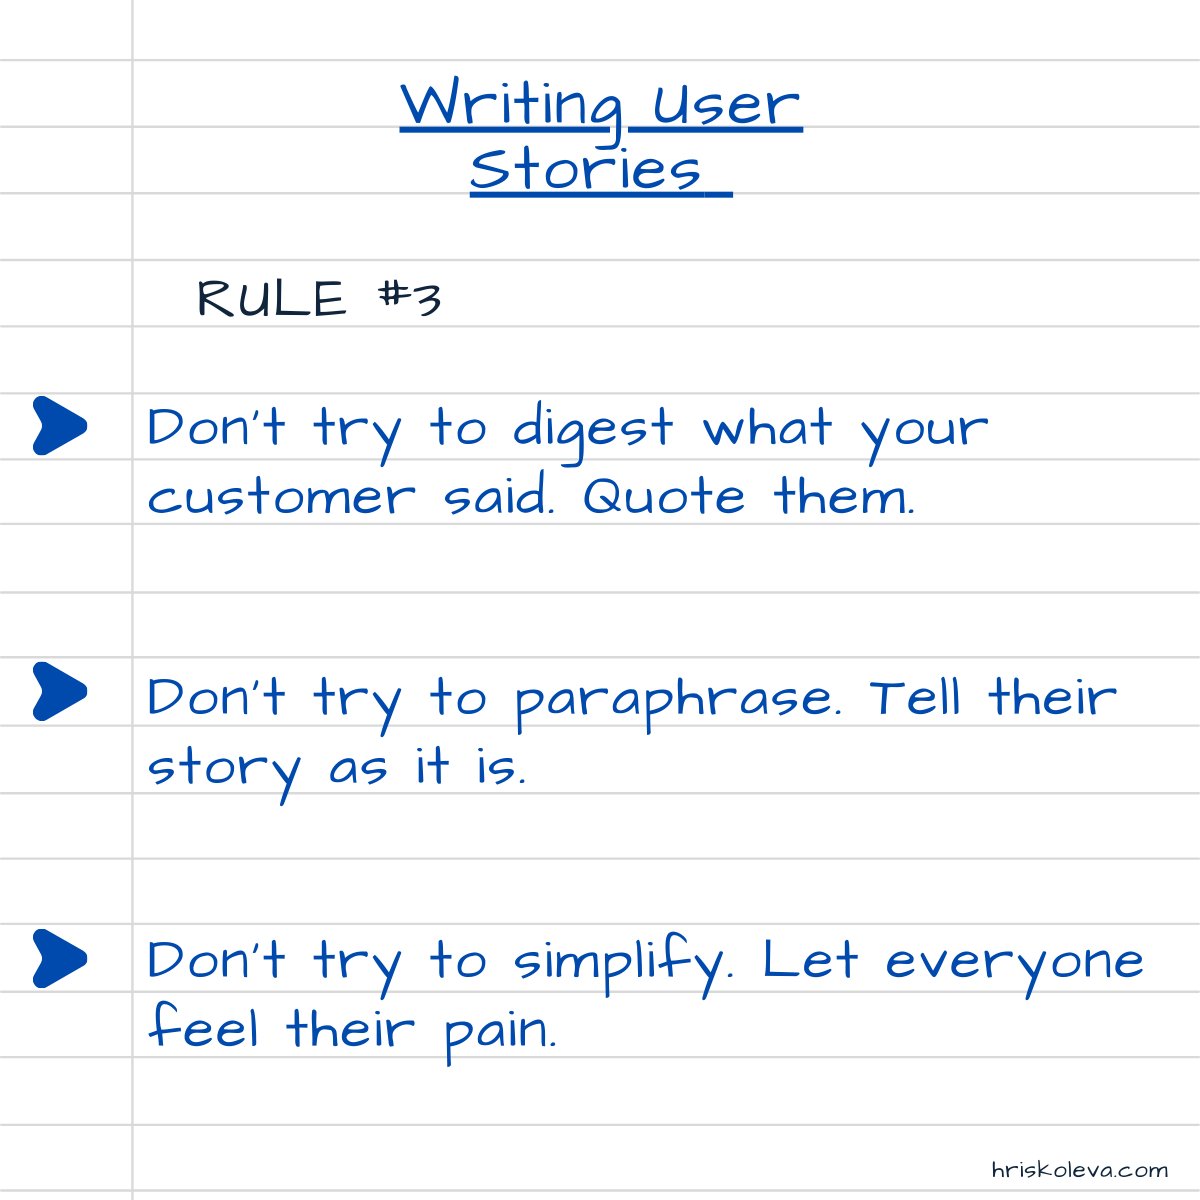 #userstories #qualityculture